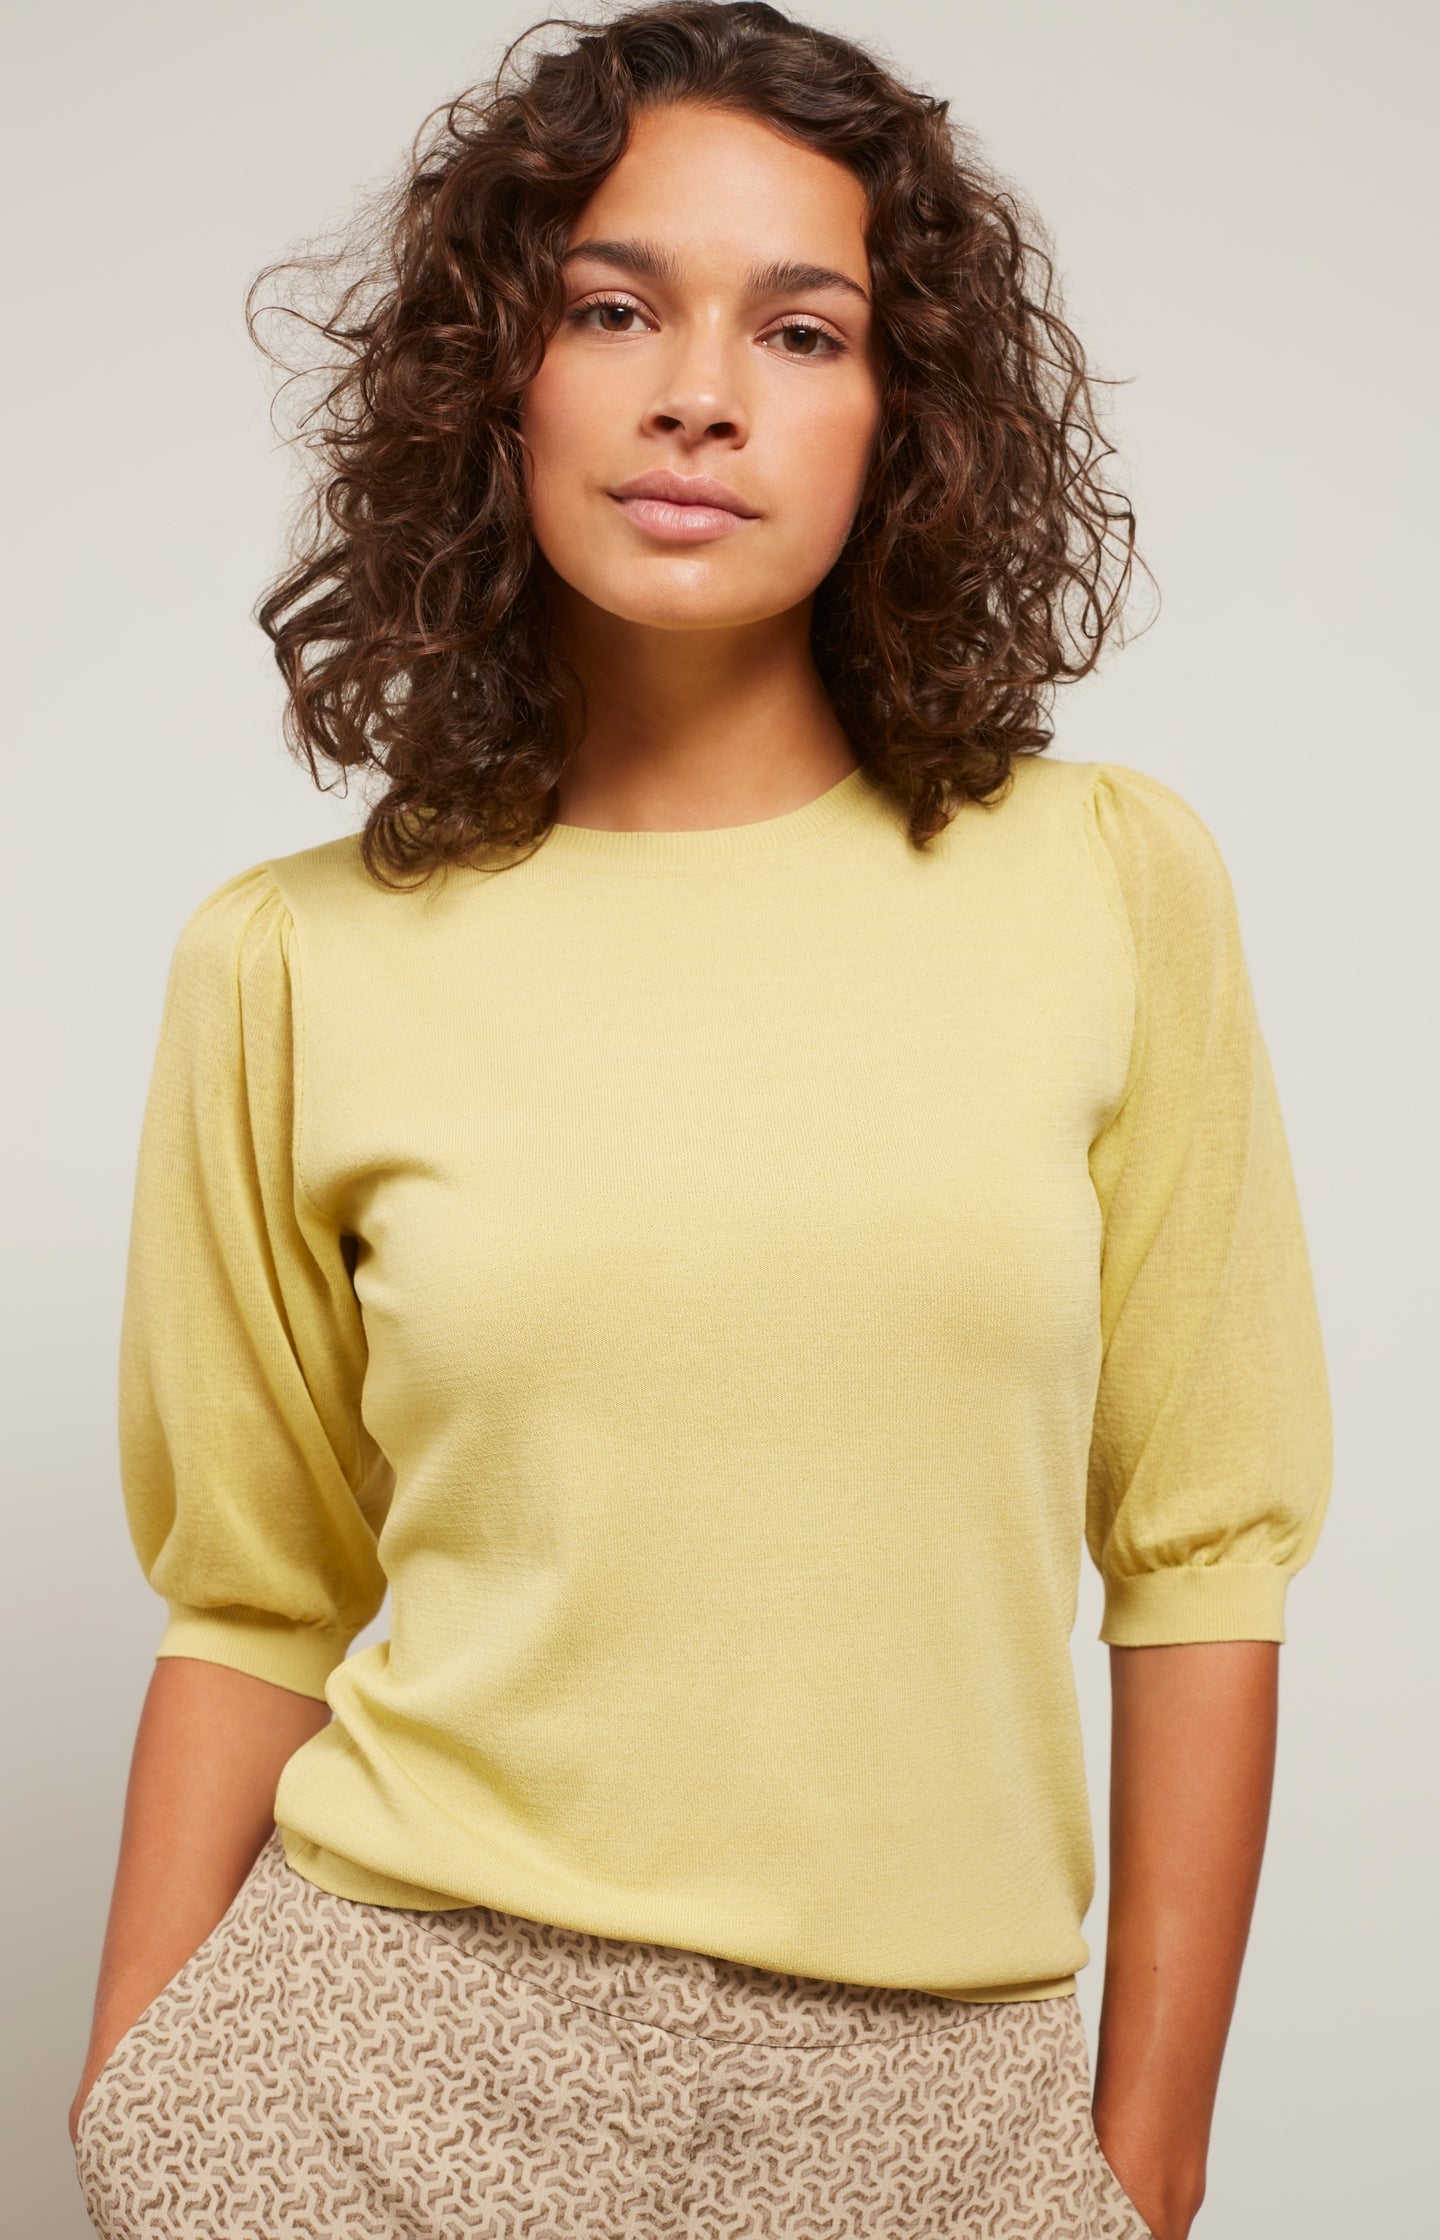 Sweater with round neck and mid-length puff sleeves - Type: lookbook